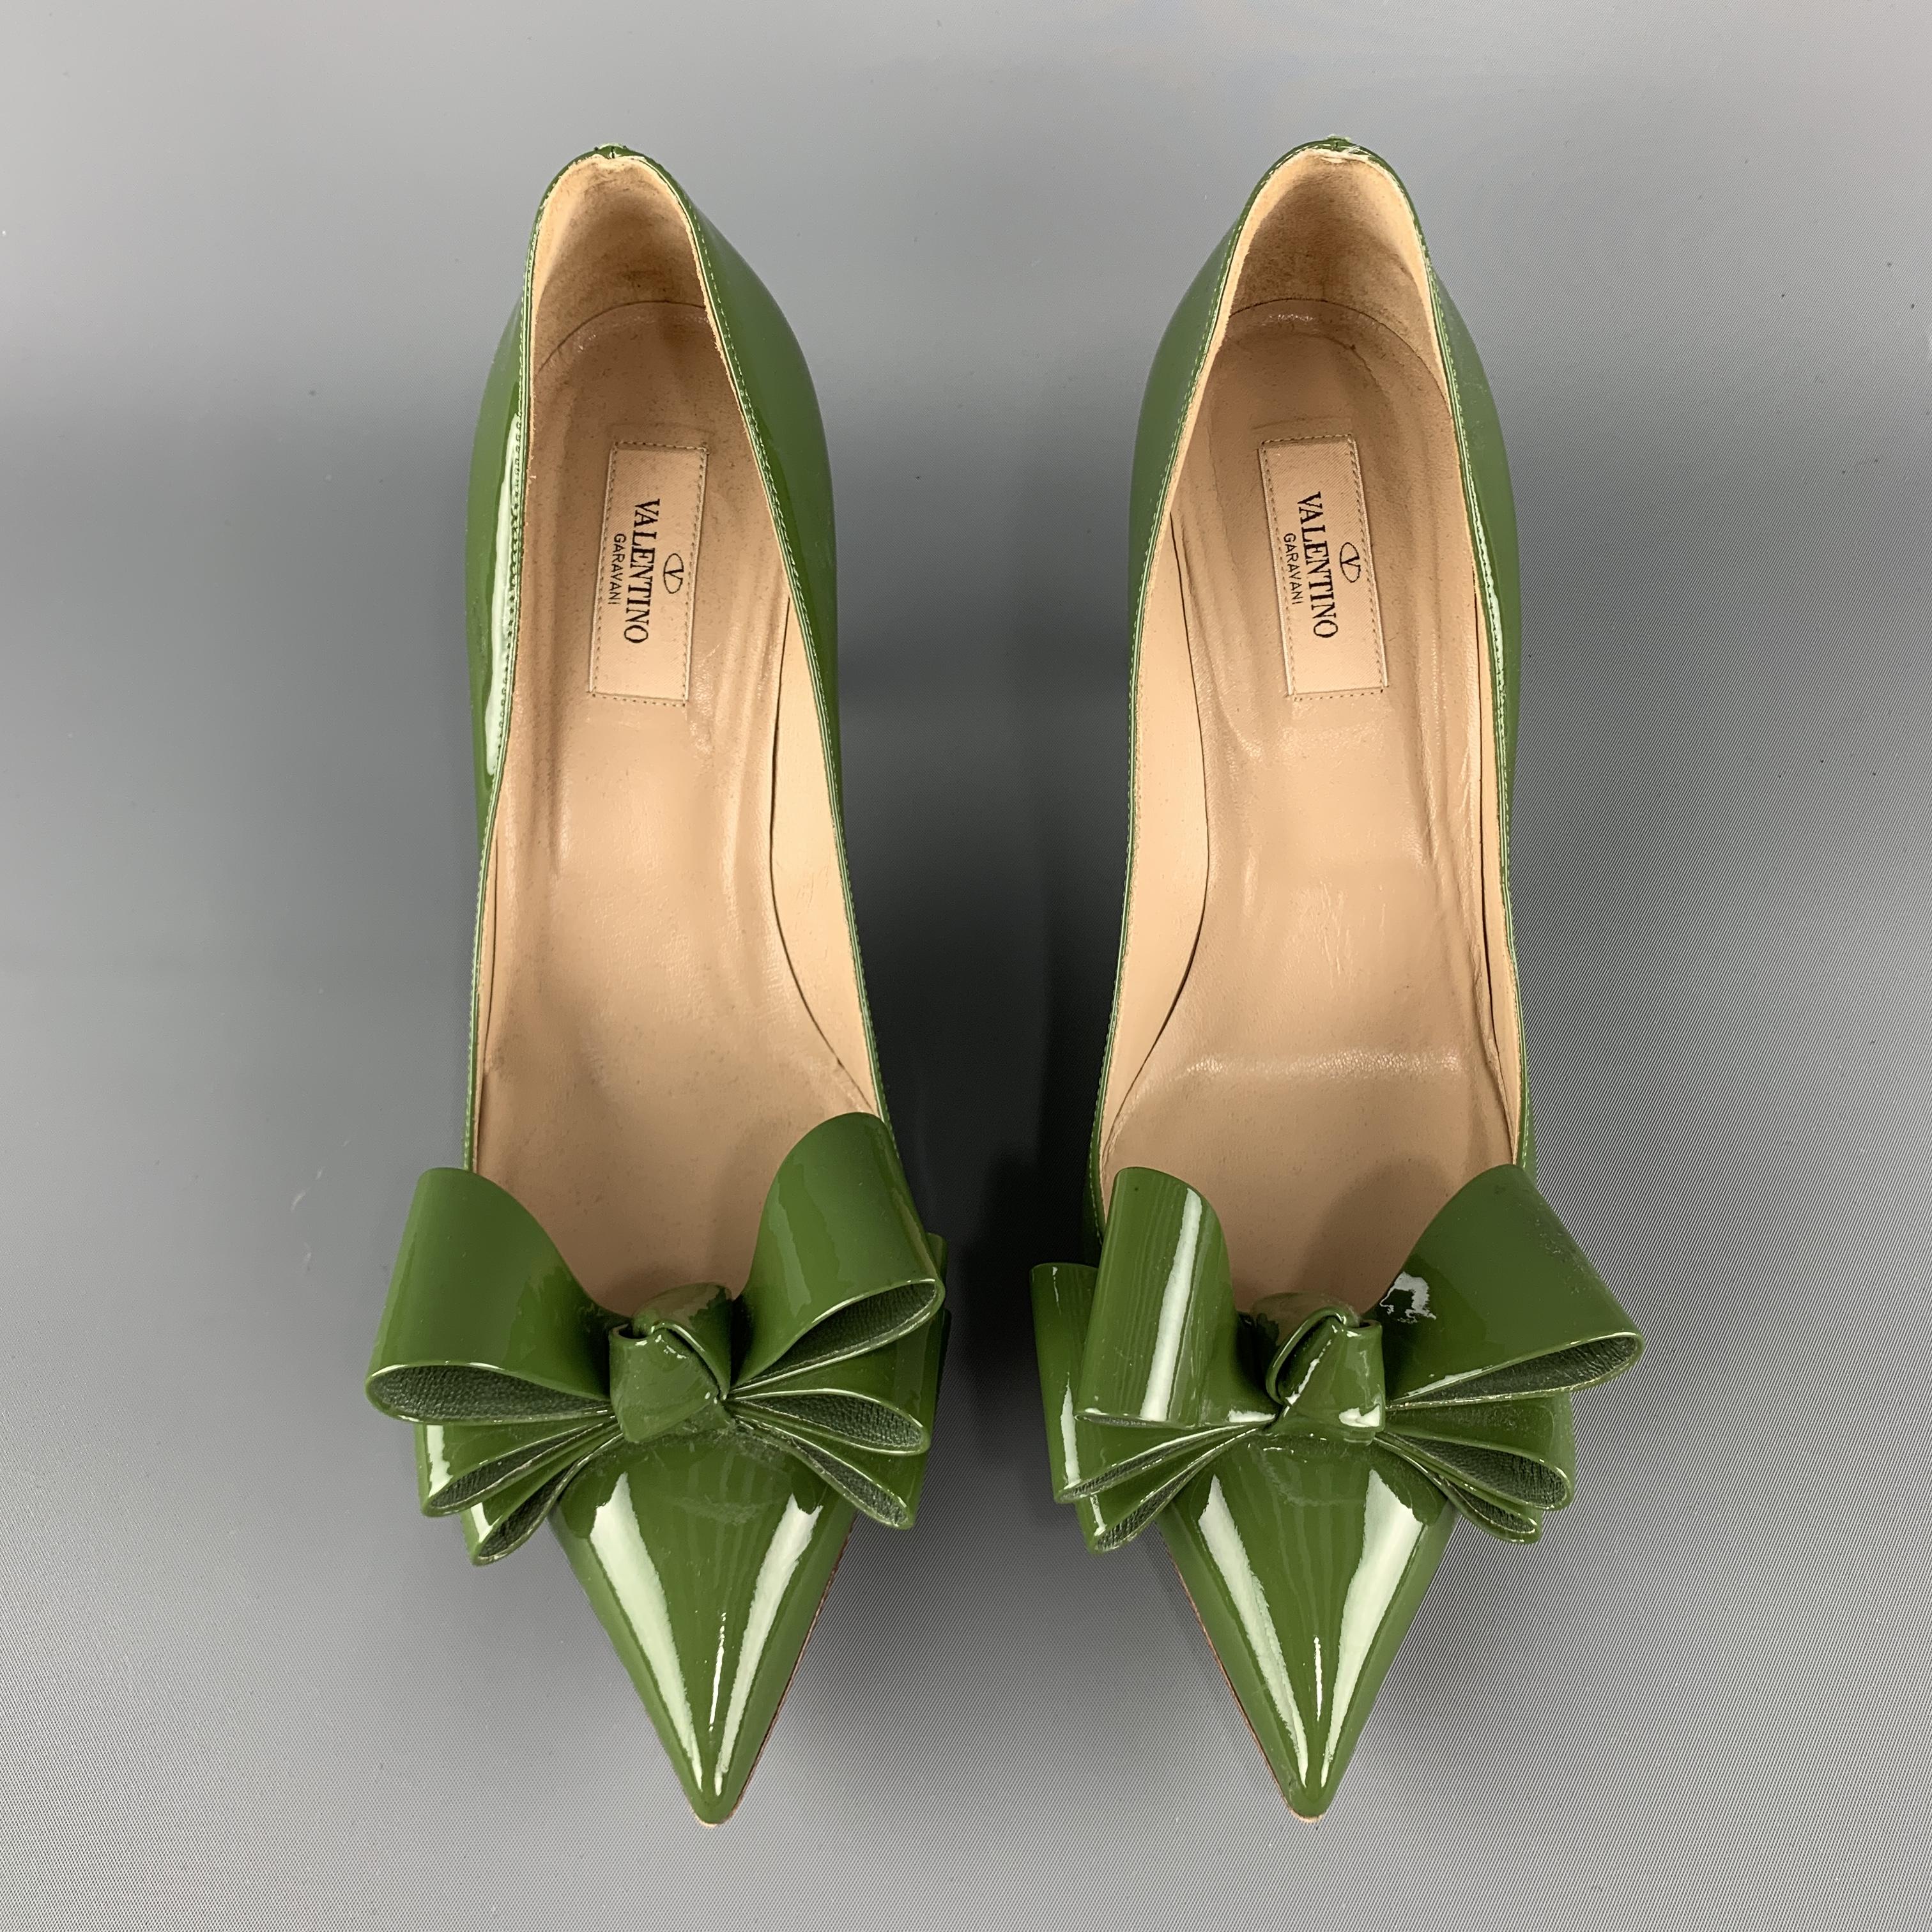 green heels with bow